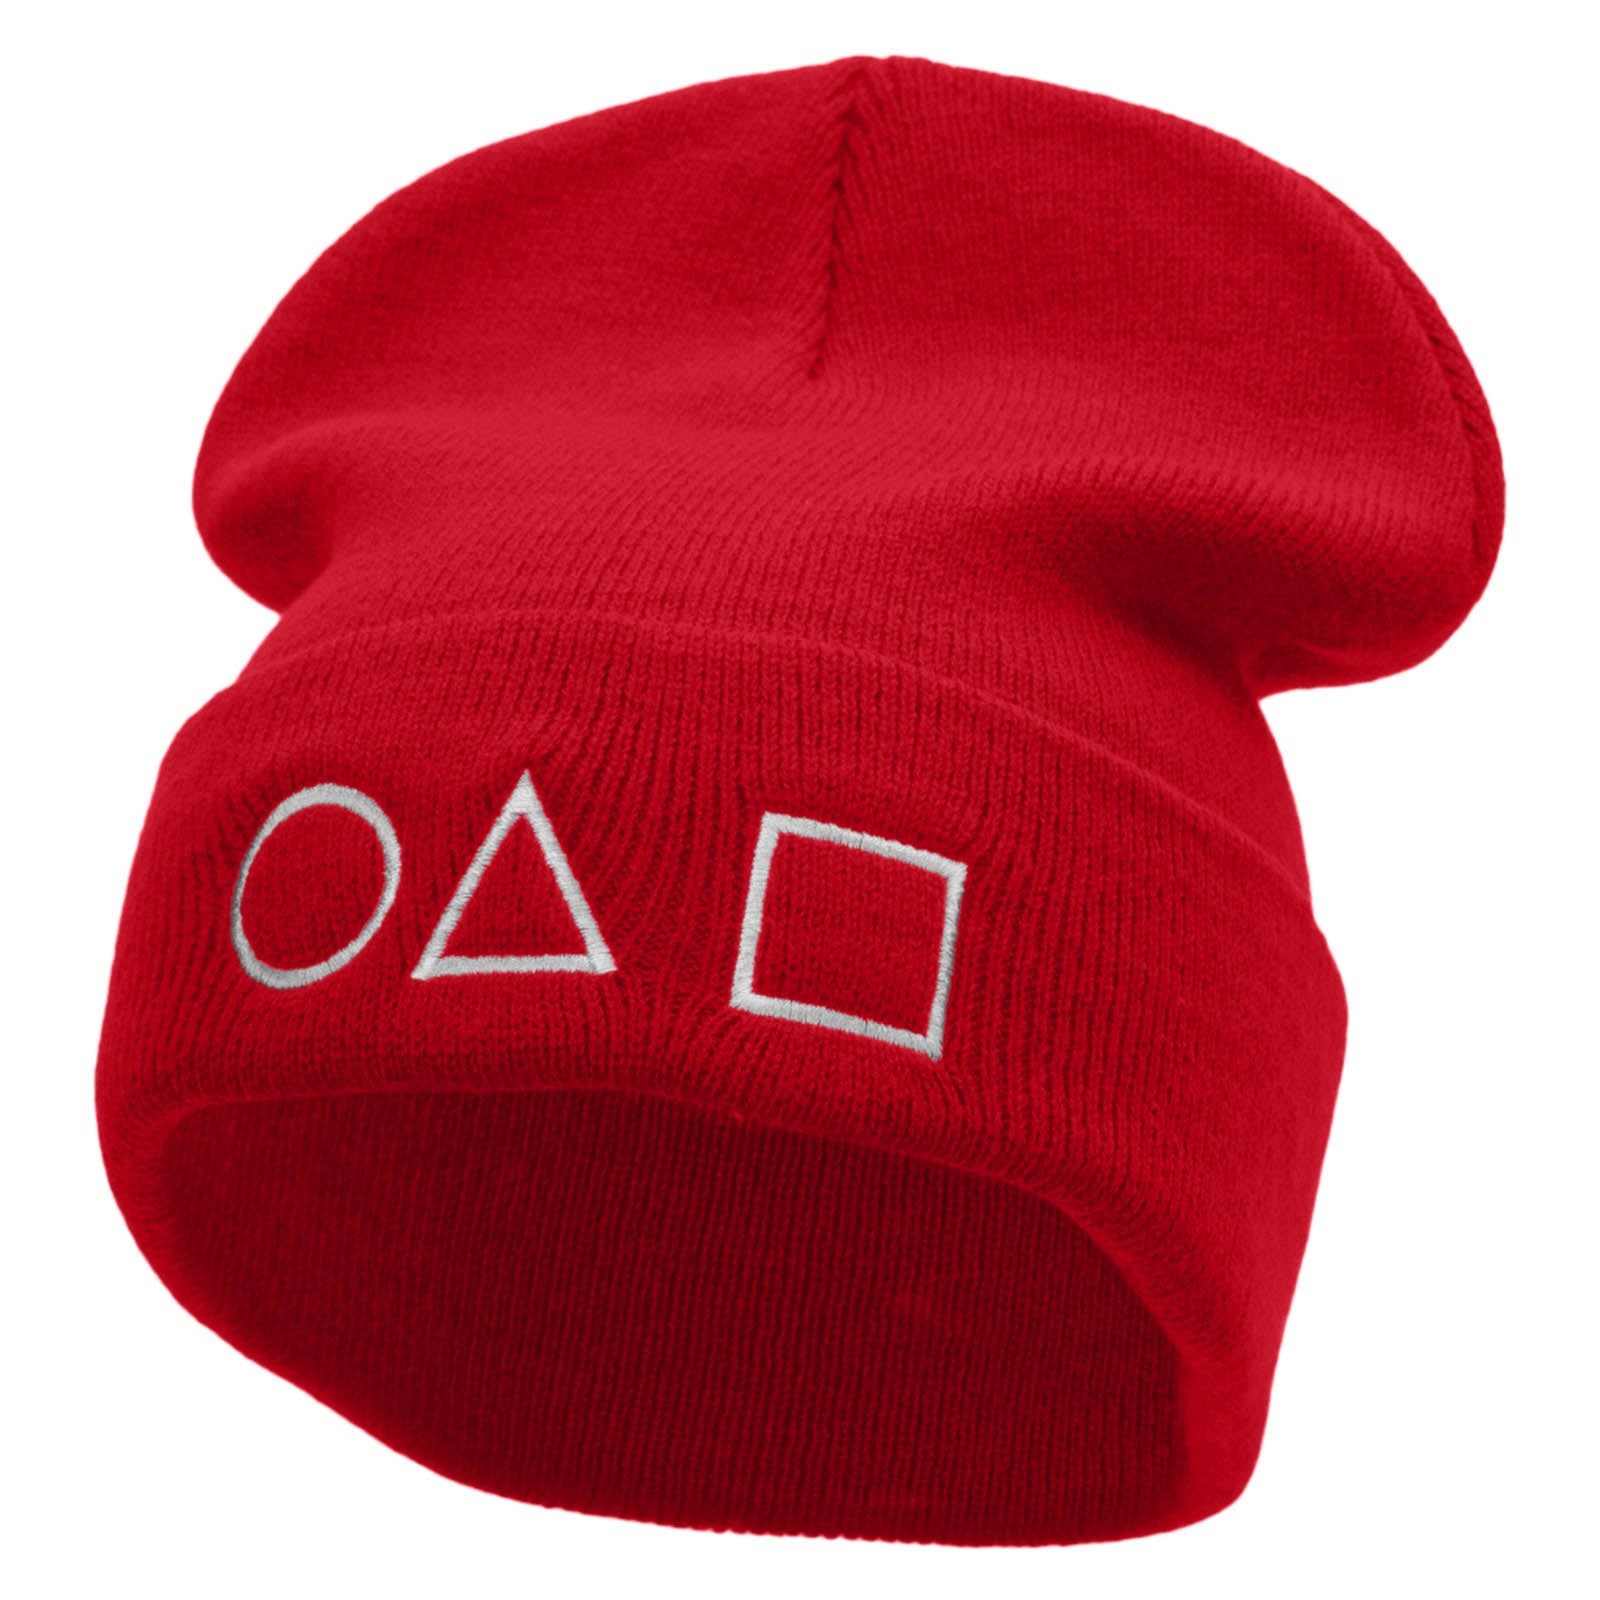 Circle Triangle Square Game Embroidered 12 Inch Long Knitted Beanie - Red OSFM